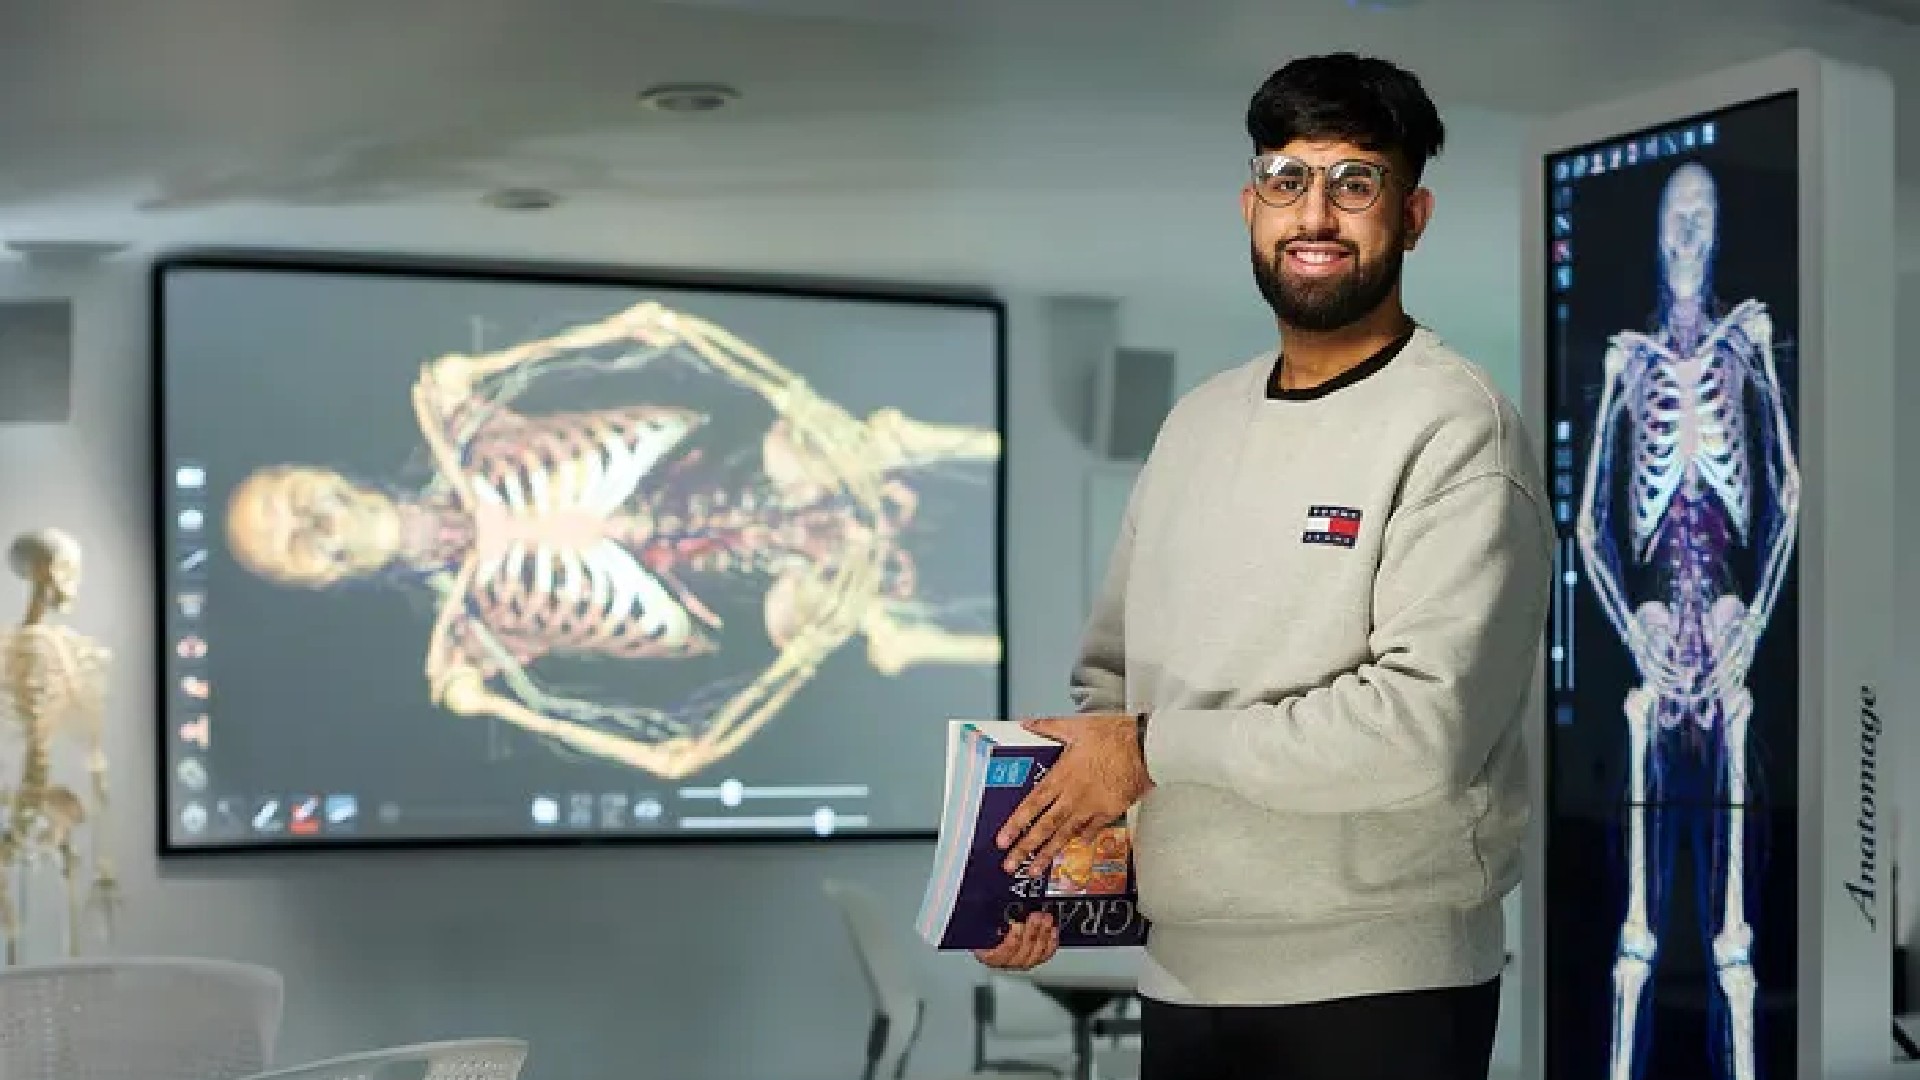 An image of a student stood in a classroom. They are stood in front of a screen on the wall that is showing an image of a skeleton. The student is holding a book. 